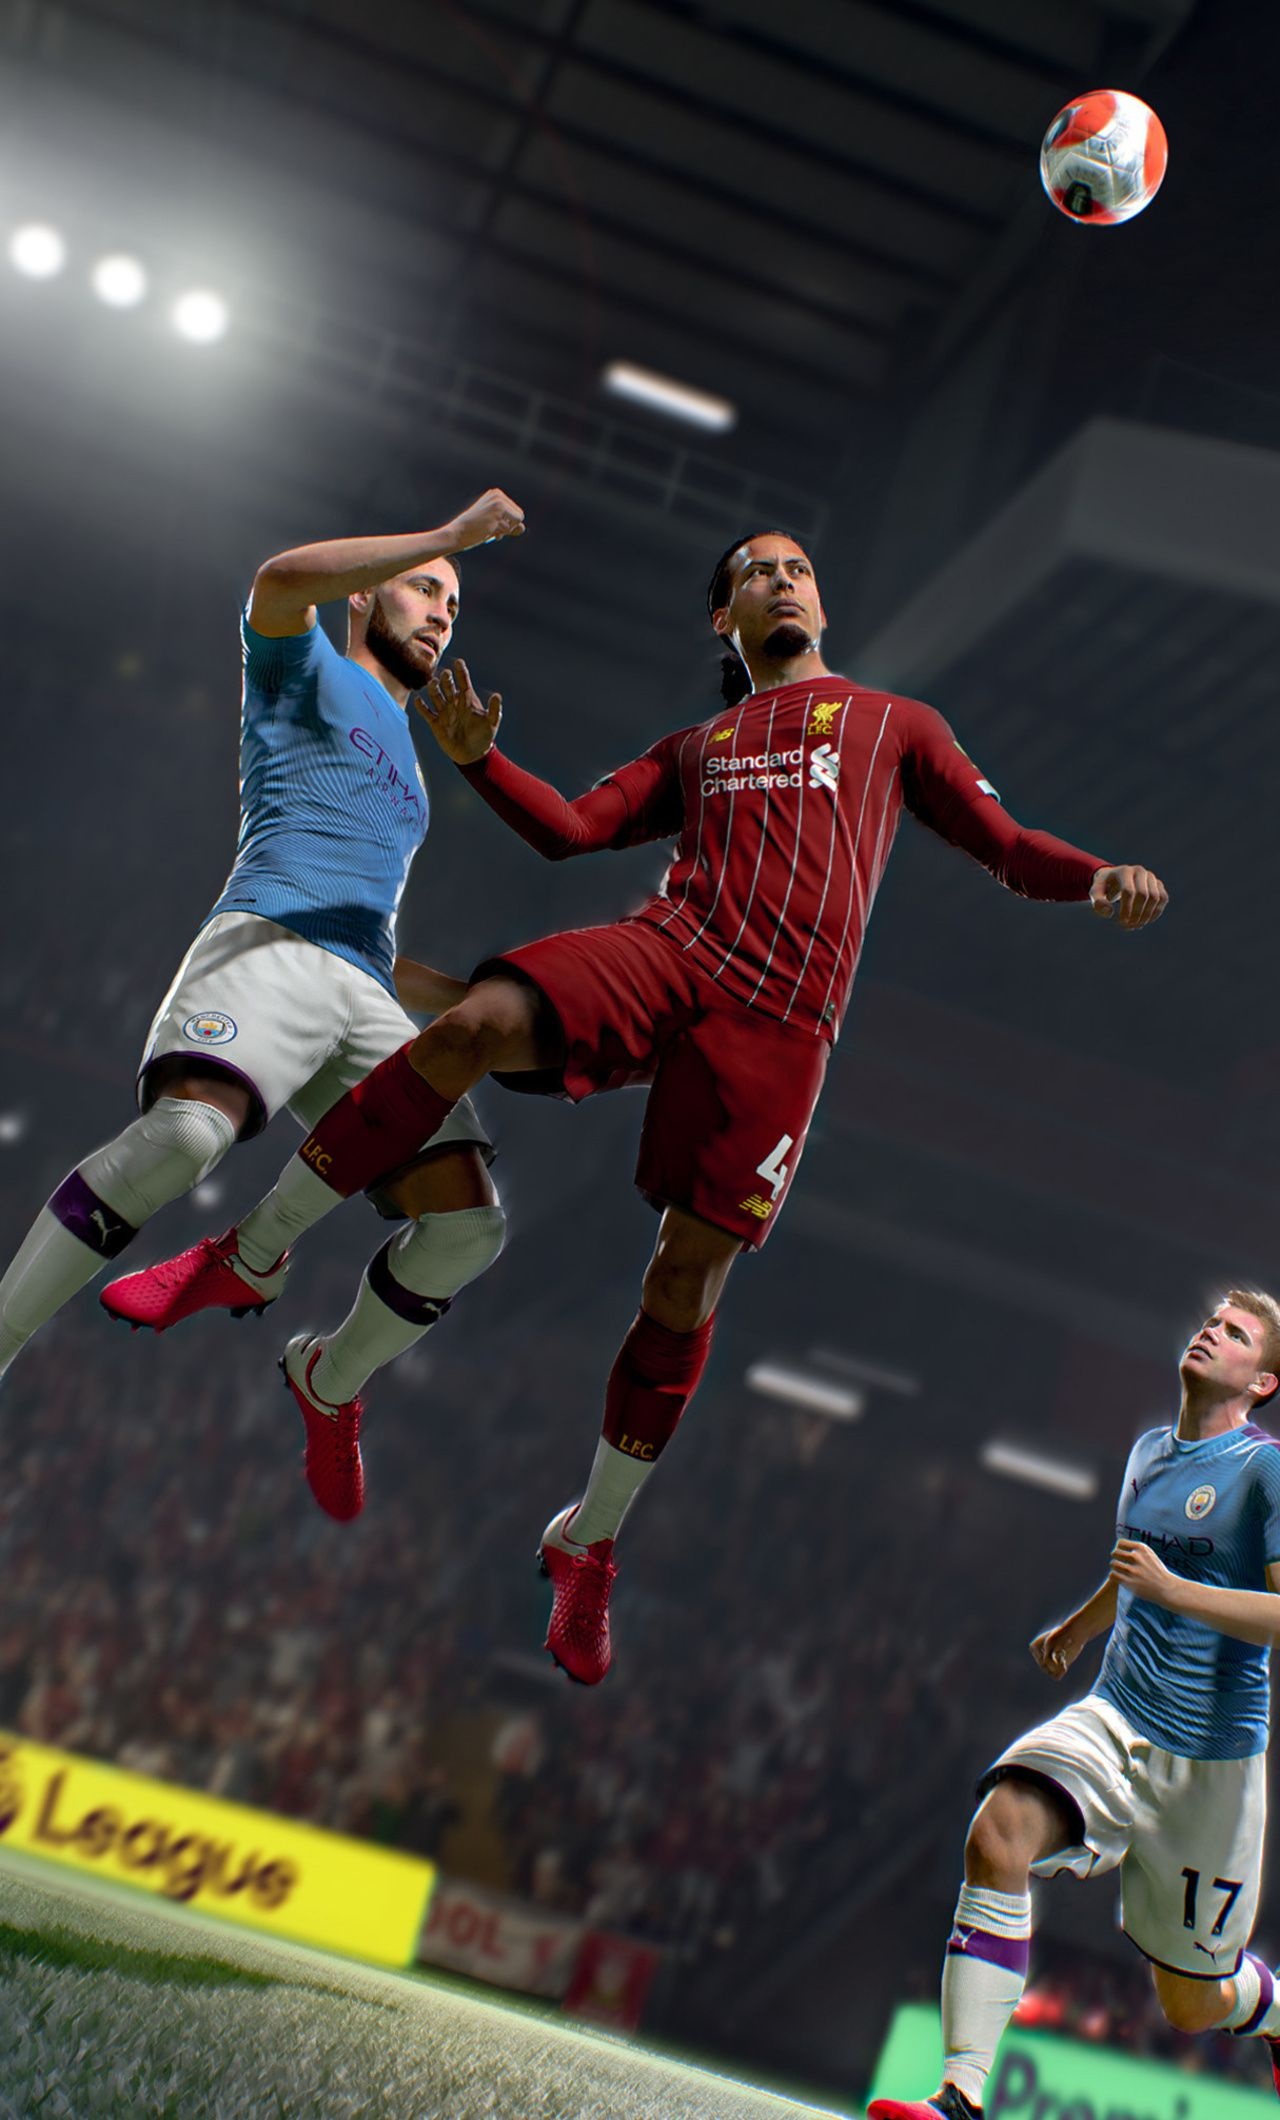 Sports game euphoria, FIFA wallpapers, Gaming passion, Football craze, 1280x2120 HD Handy